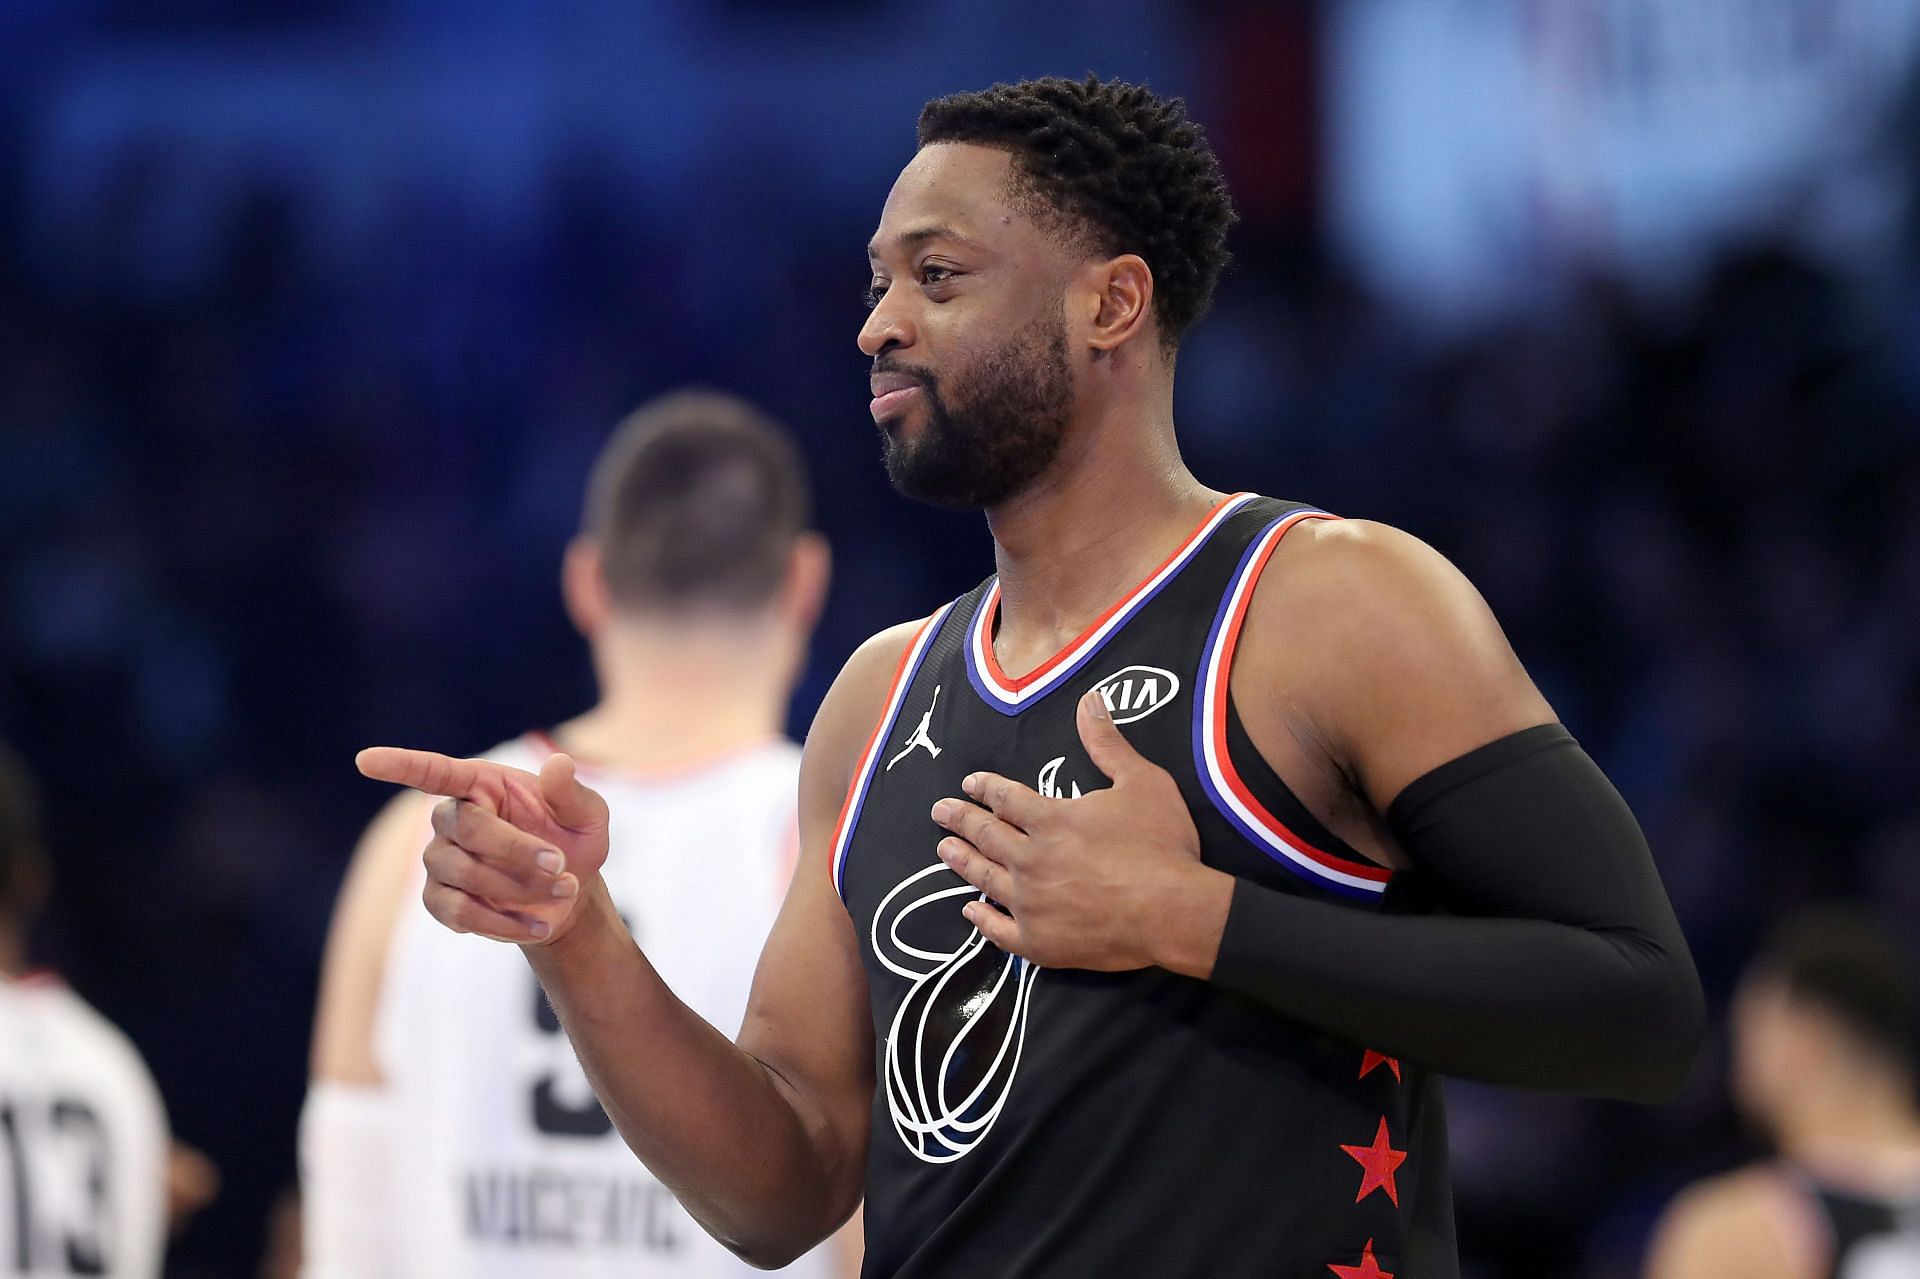 Dwyane Wade #3 of the Miami Heat reacts as they take on Team Giannis in the second quarter during the NBA All-Star game as part of the 2019 NBA All-Star Weekend at Spectrum Center on February 17, 2019 in Charlotte, North Carolina.